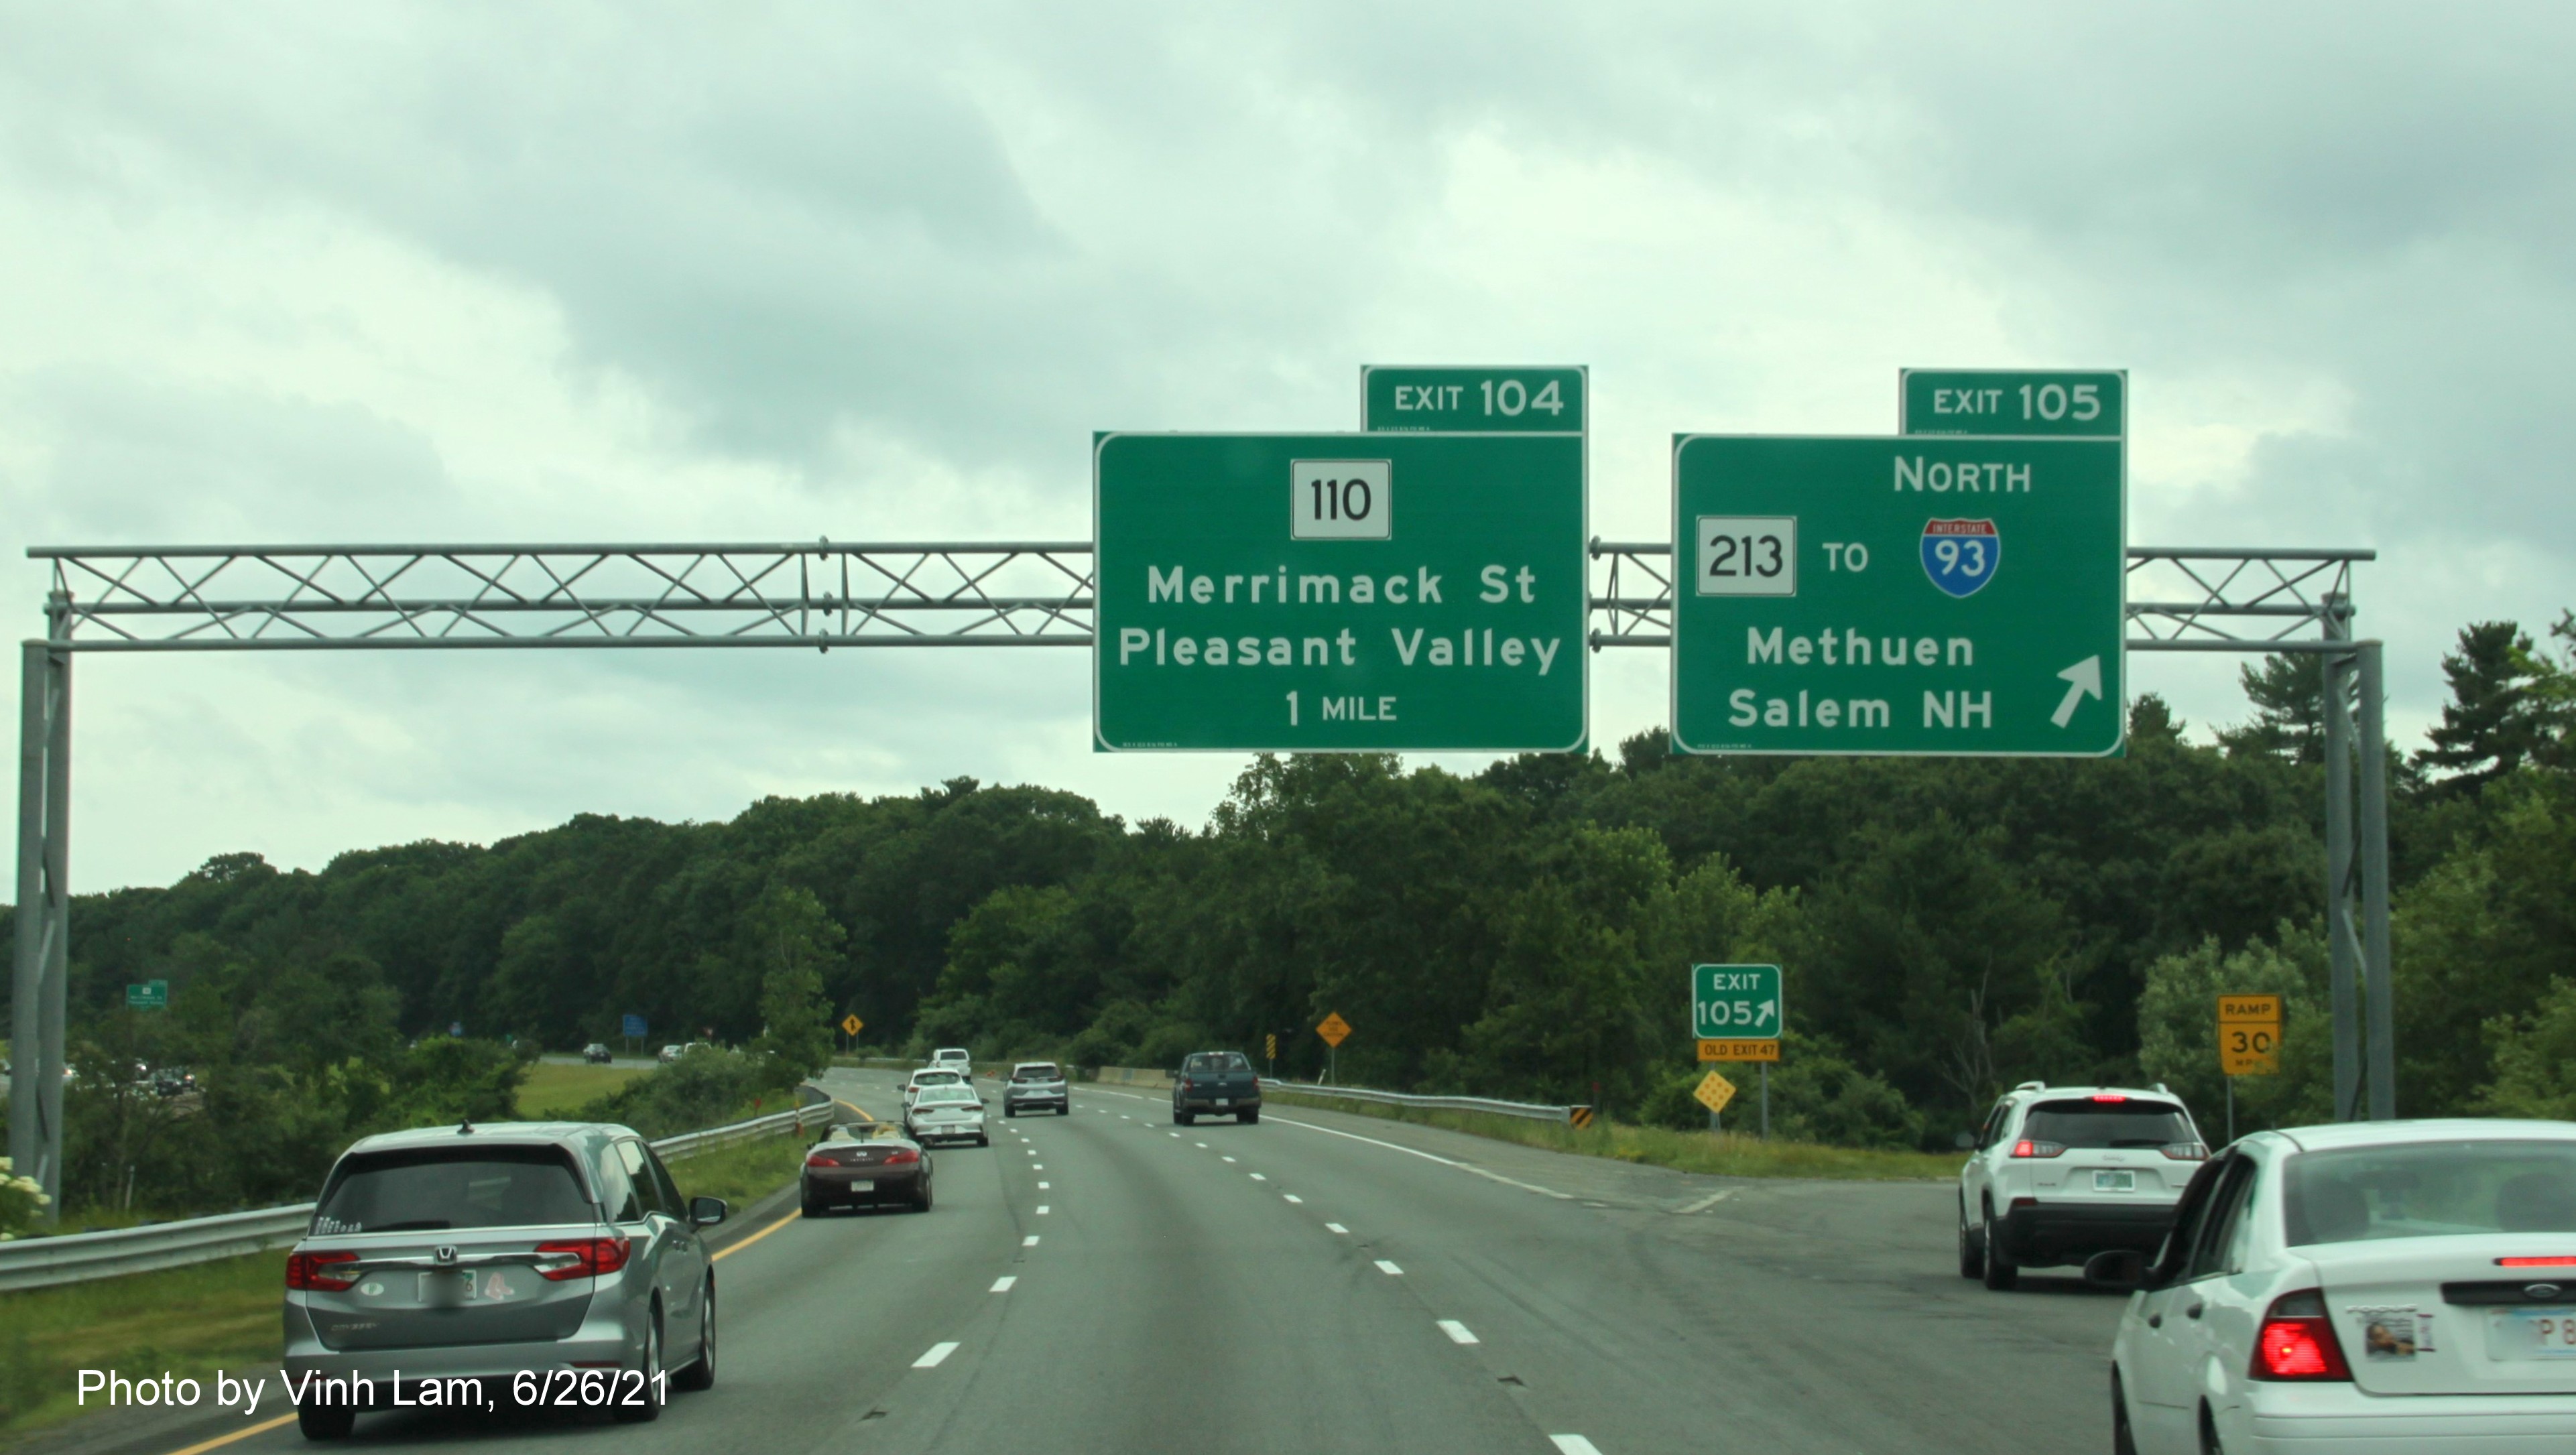 Image of overhead signage at ramp for MA 213 exit with new milepost based exit numbers on I-495 South in Lawrence, photo by Vinh Lam, June 2021